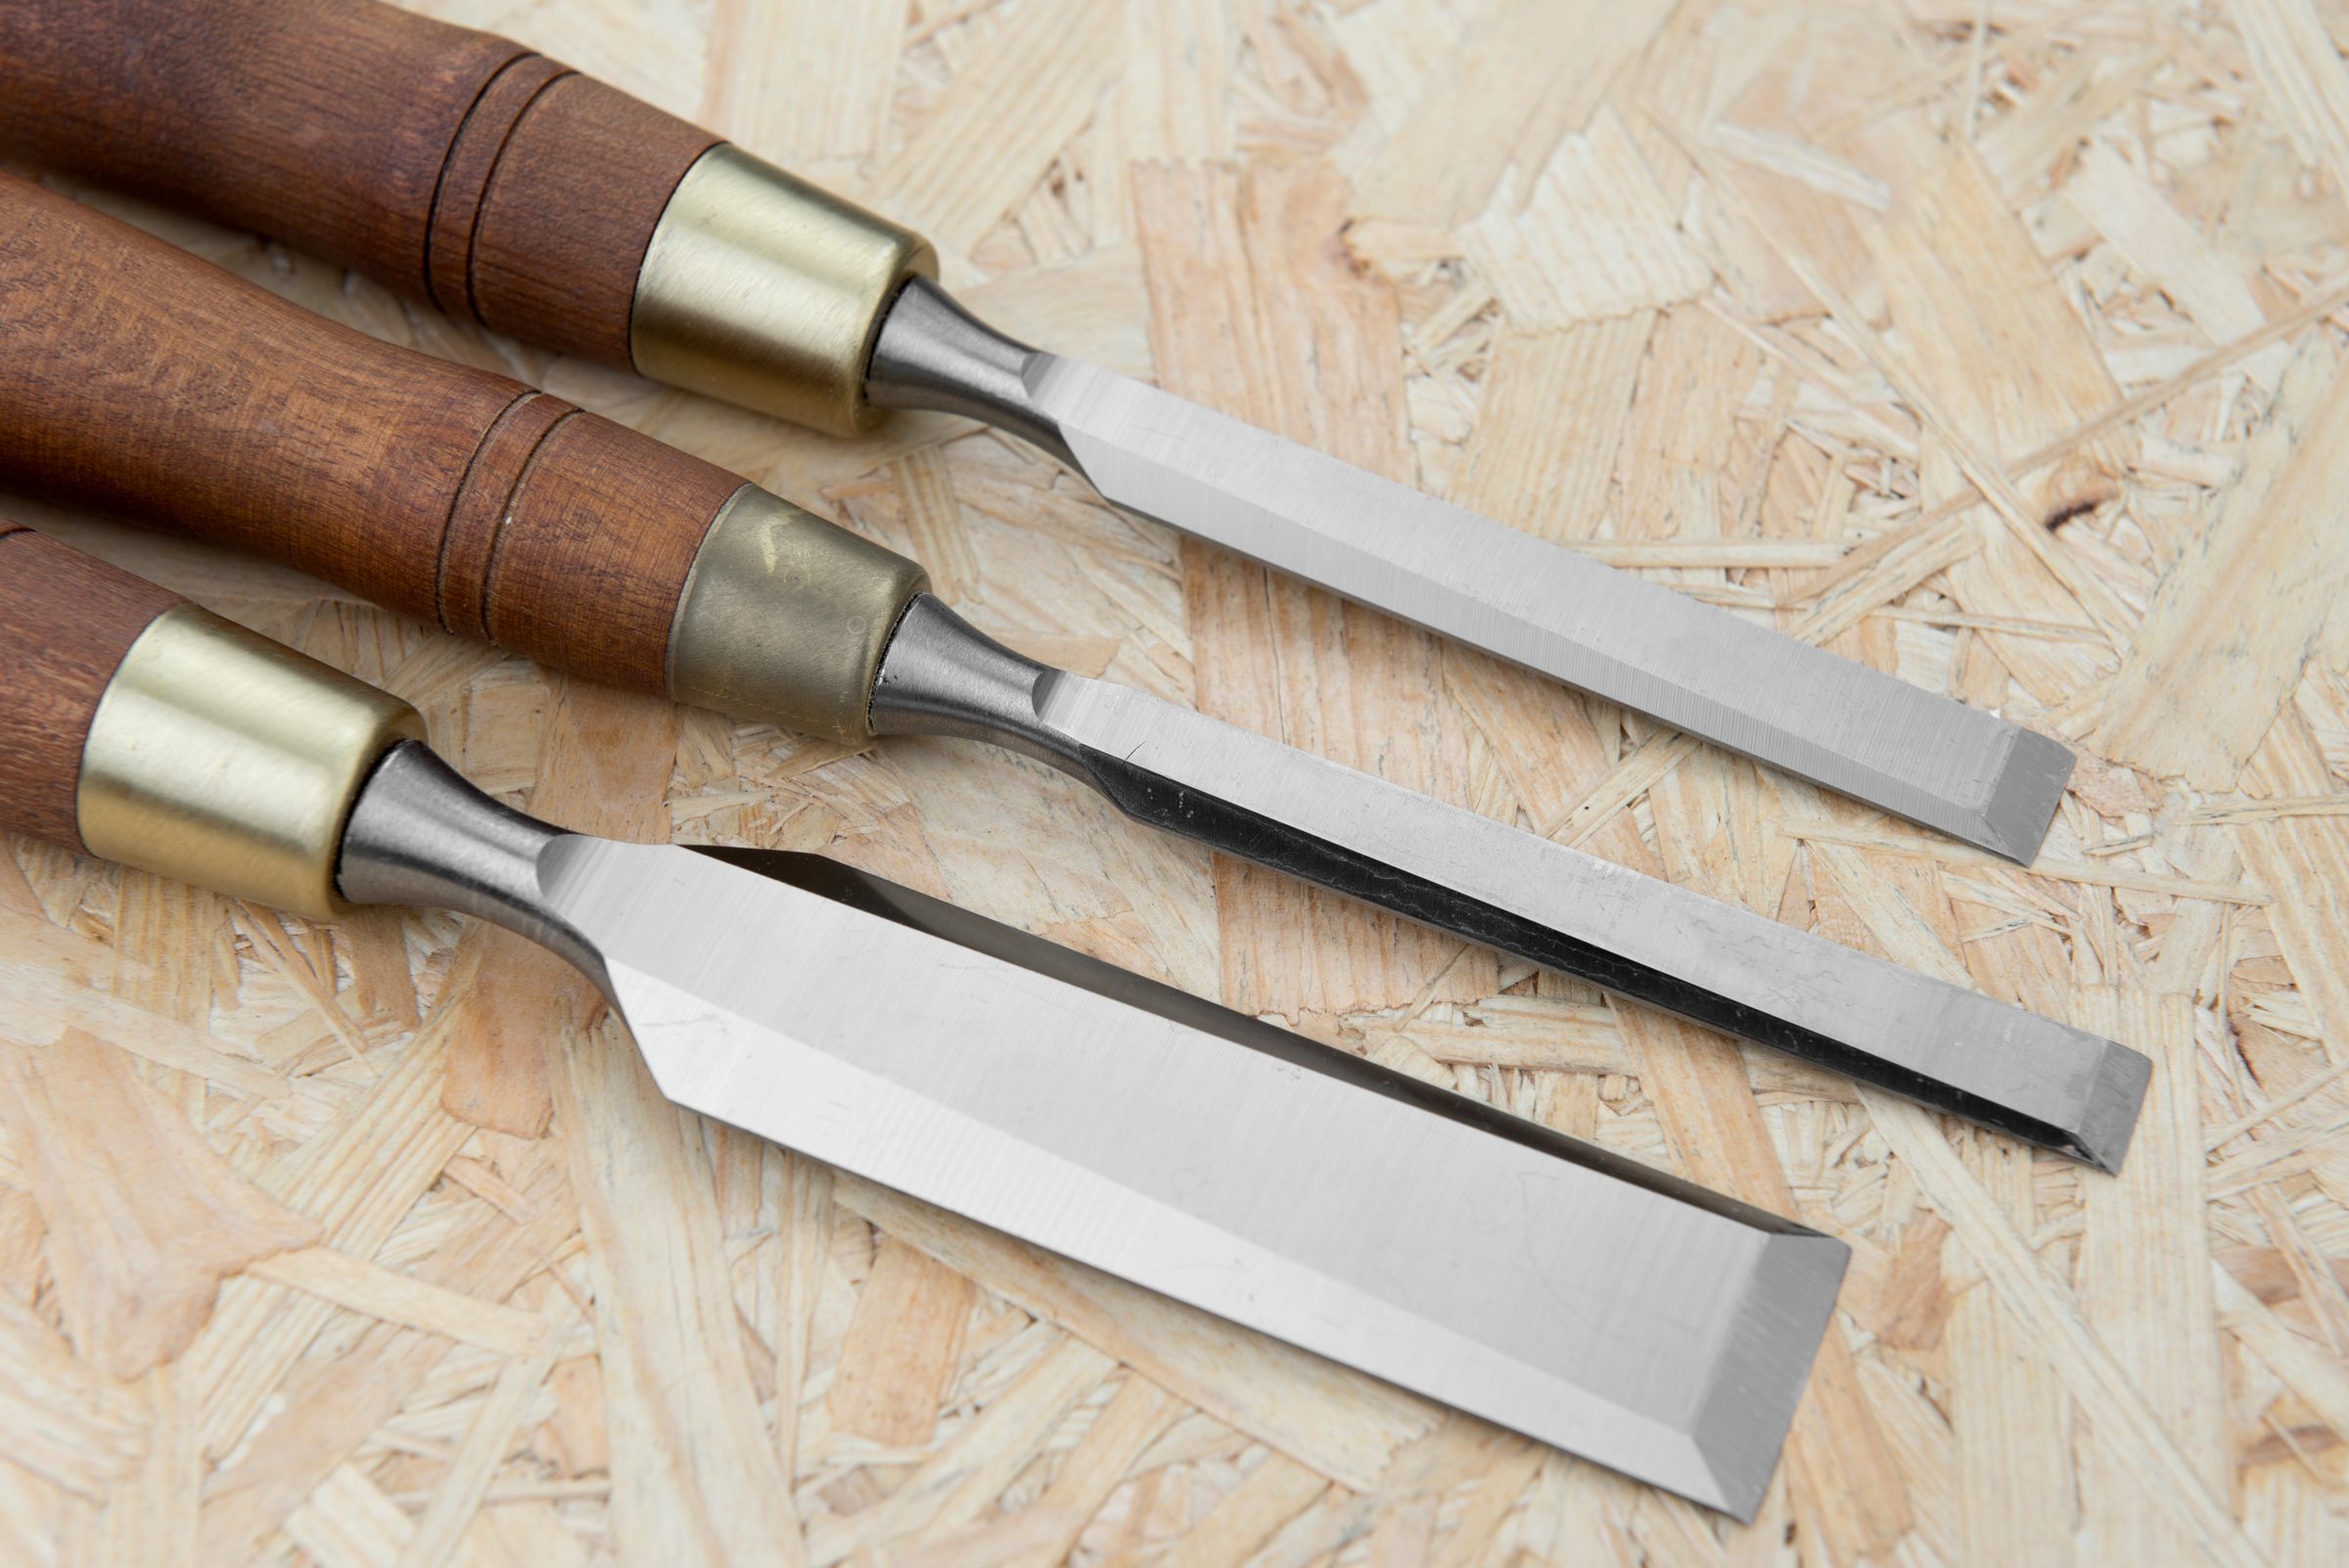 Professional Wood Carving Tools: Five-Piece Wood Carving Set With Draw Knife